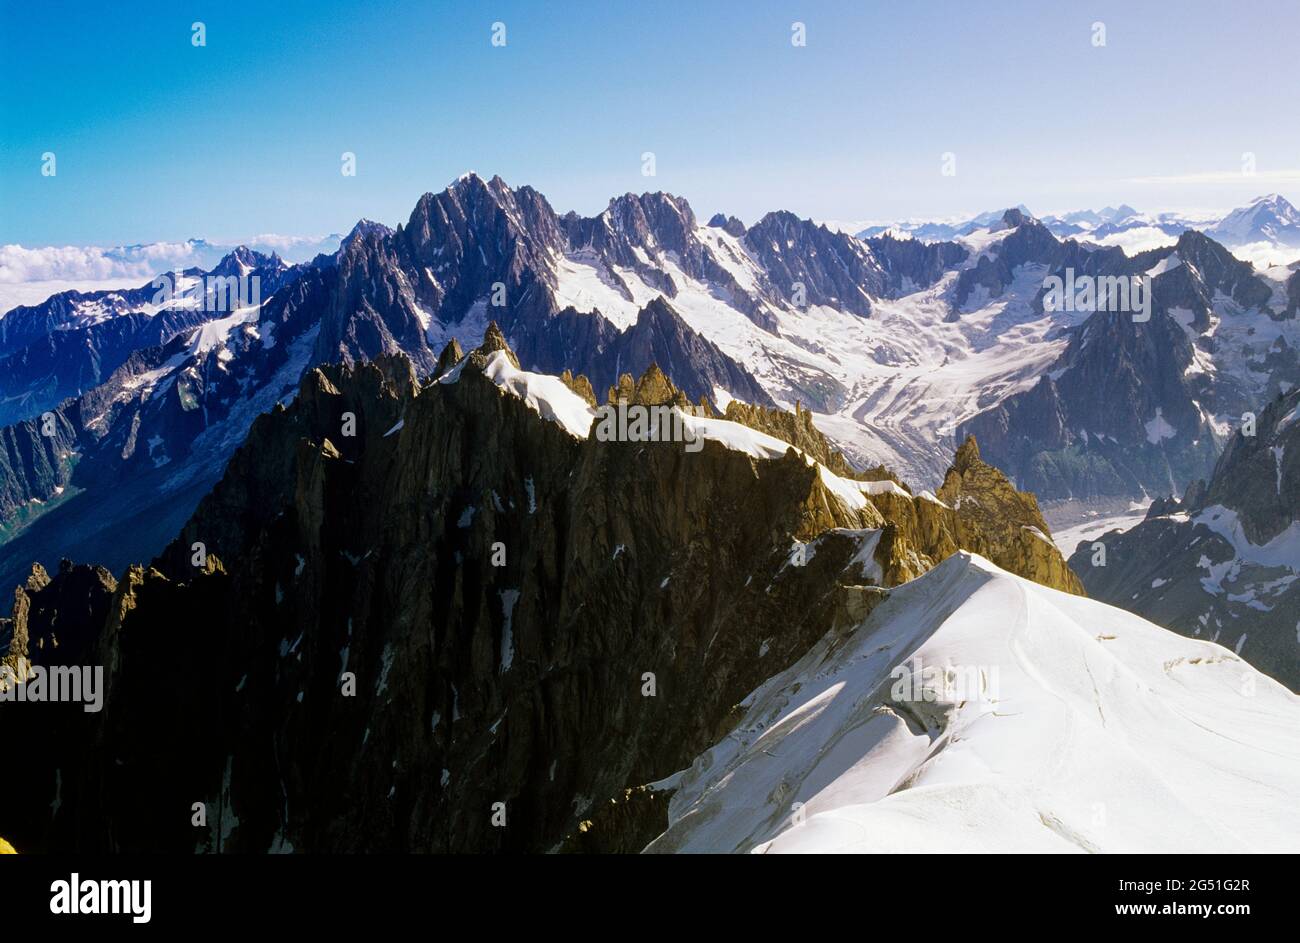 View of mountains in winter in Mont Blanc massif in Alps from Aiguille du Midi, Haute-Savoie, France Stock Photo